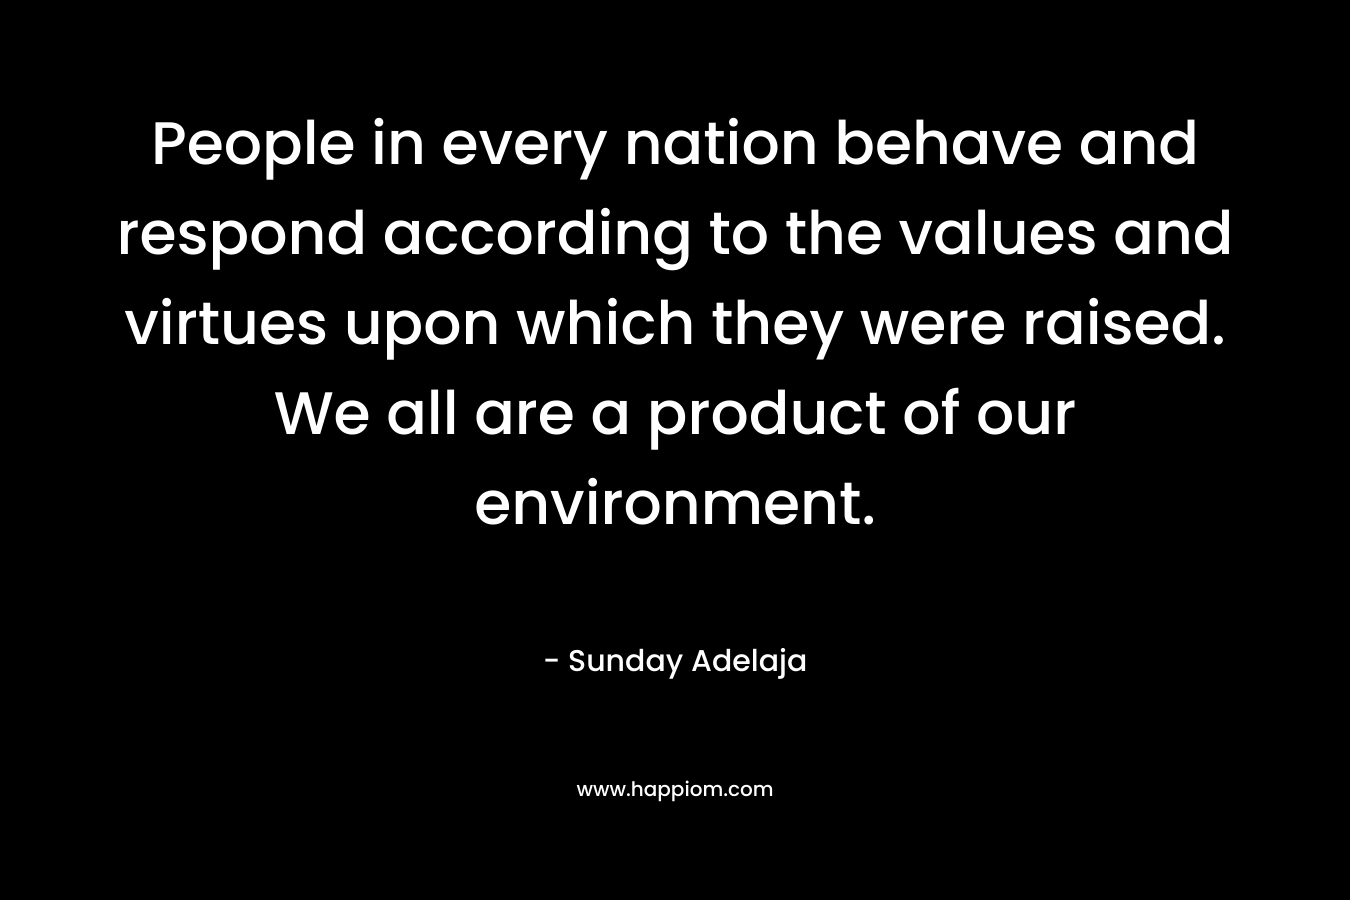 People in every nation behave and respond according to the values and virtues upon which they were raised. We all are a product of our environment. – Sunday Adelaja